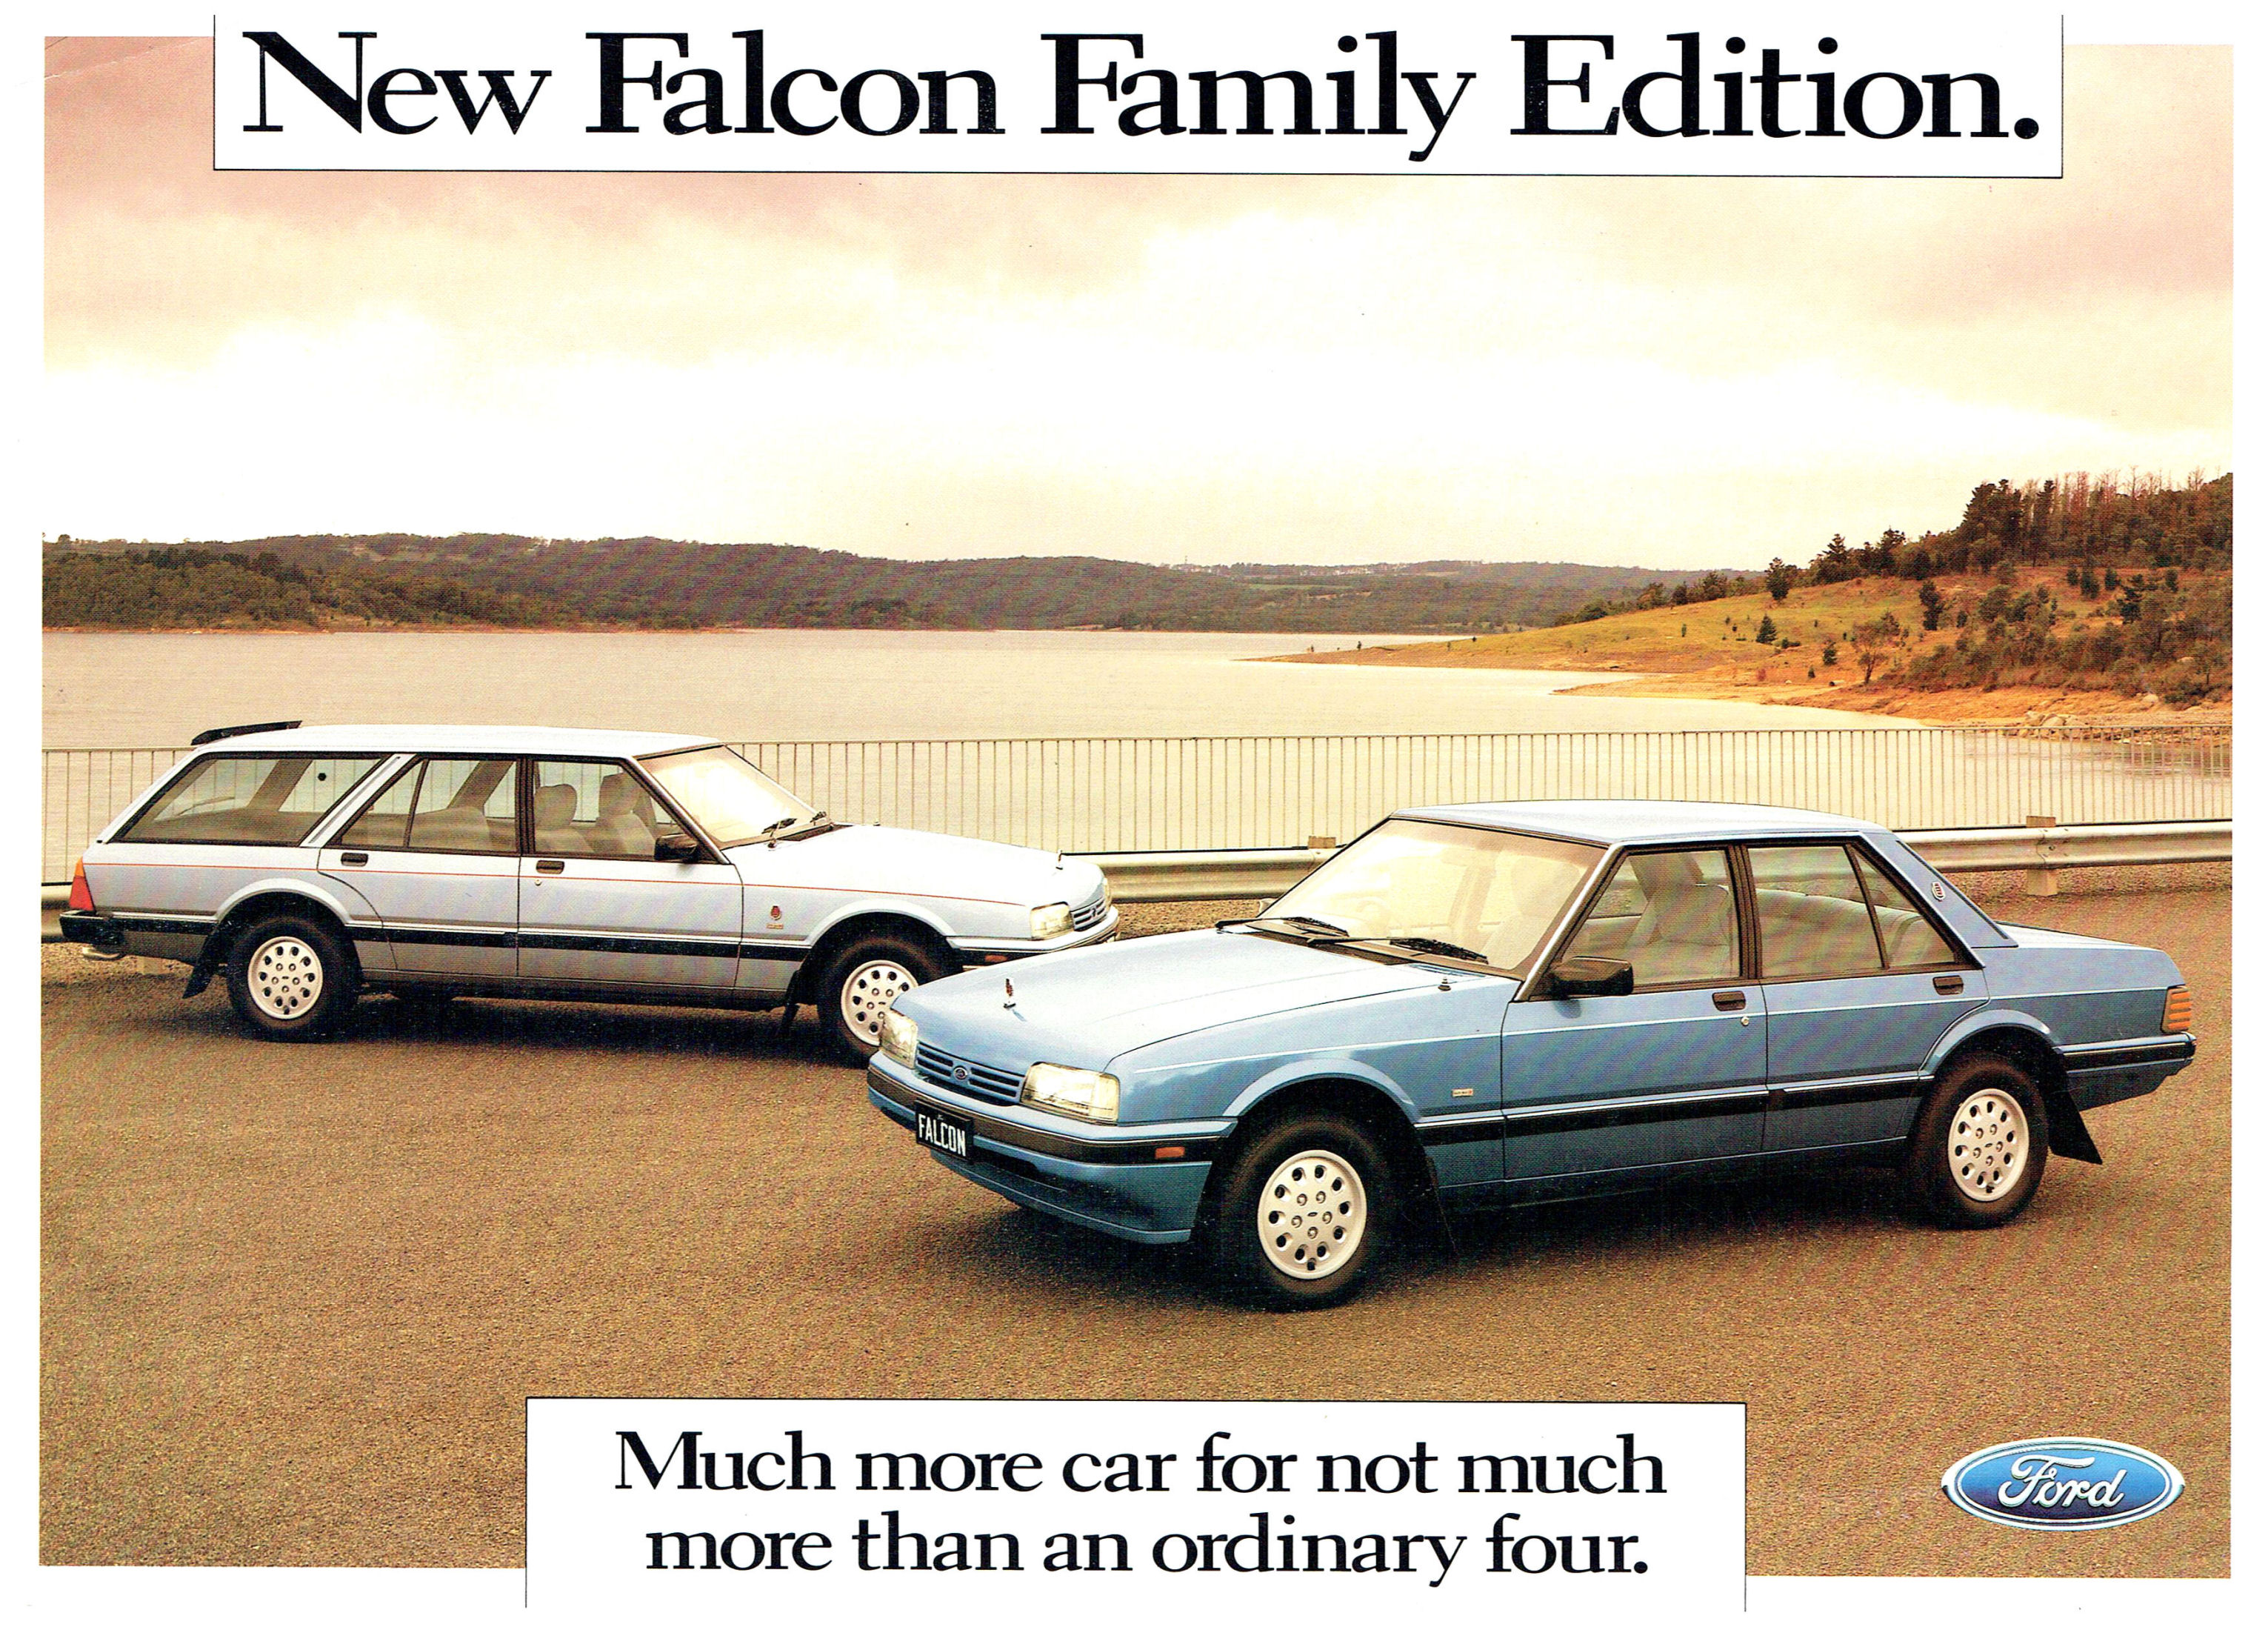 1987_Ford_XF_Falcon_Family_Edition-01